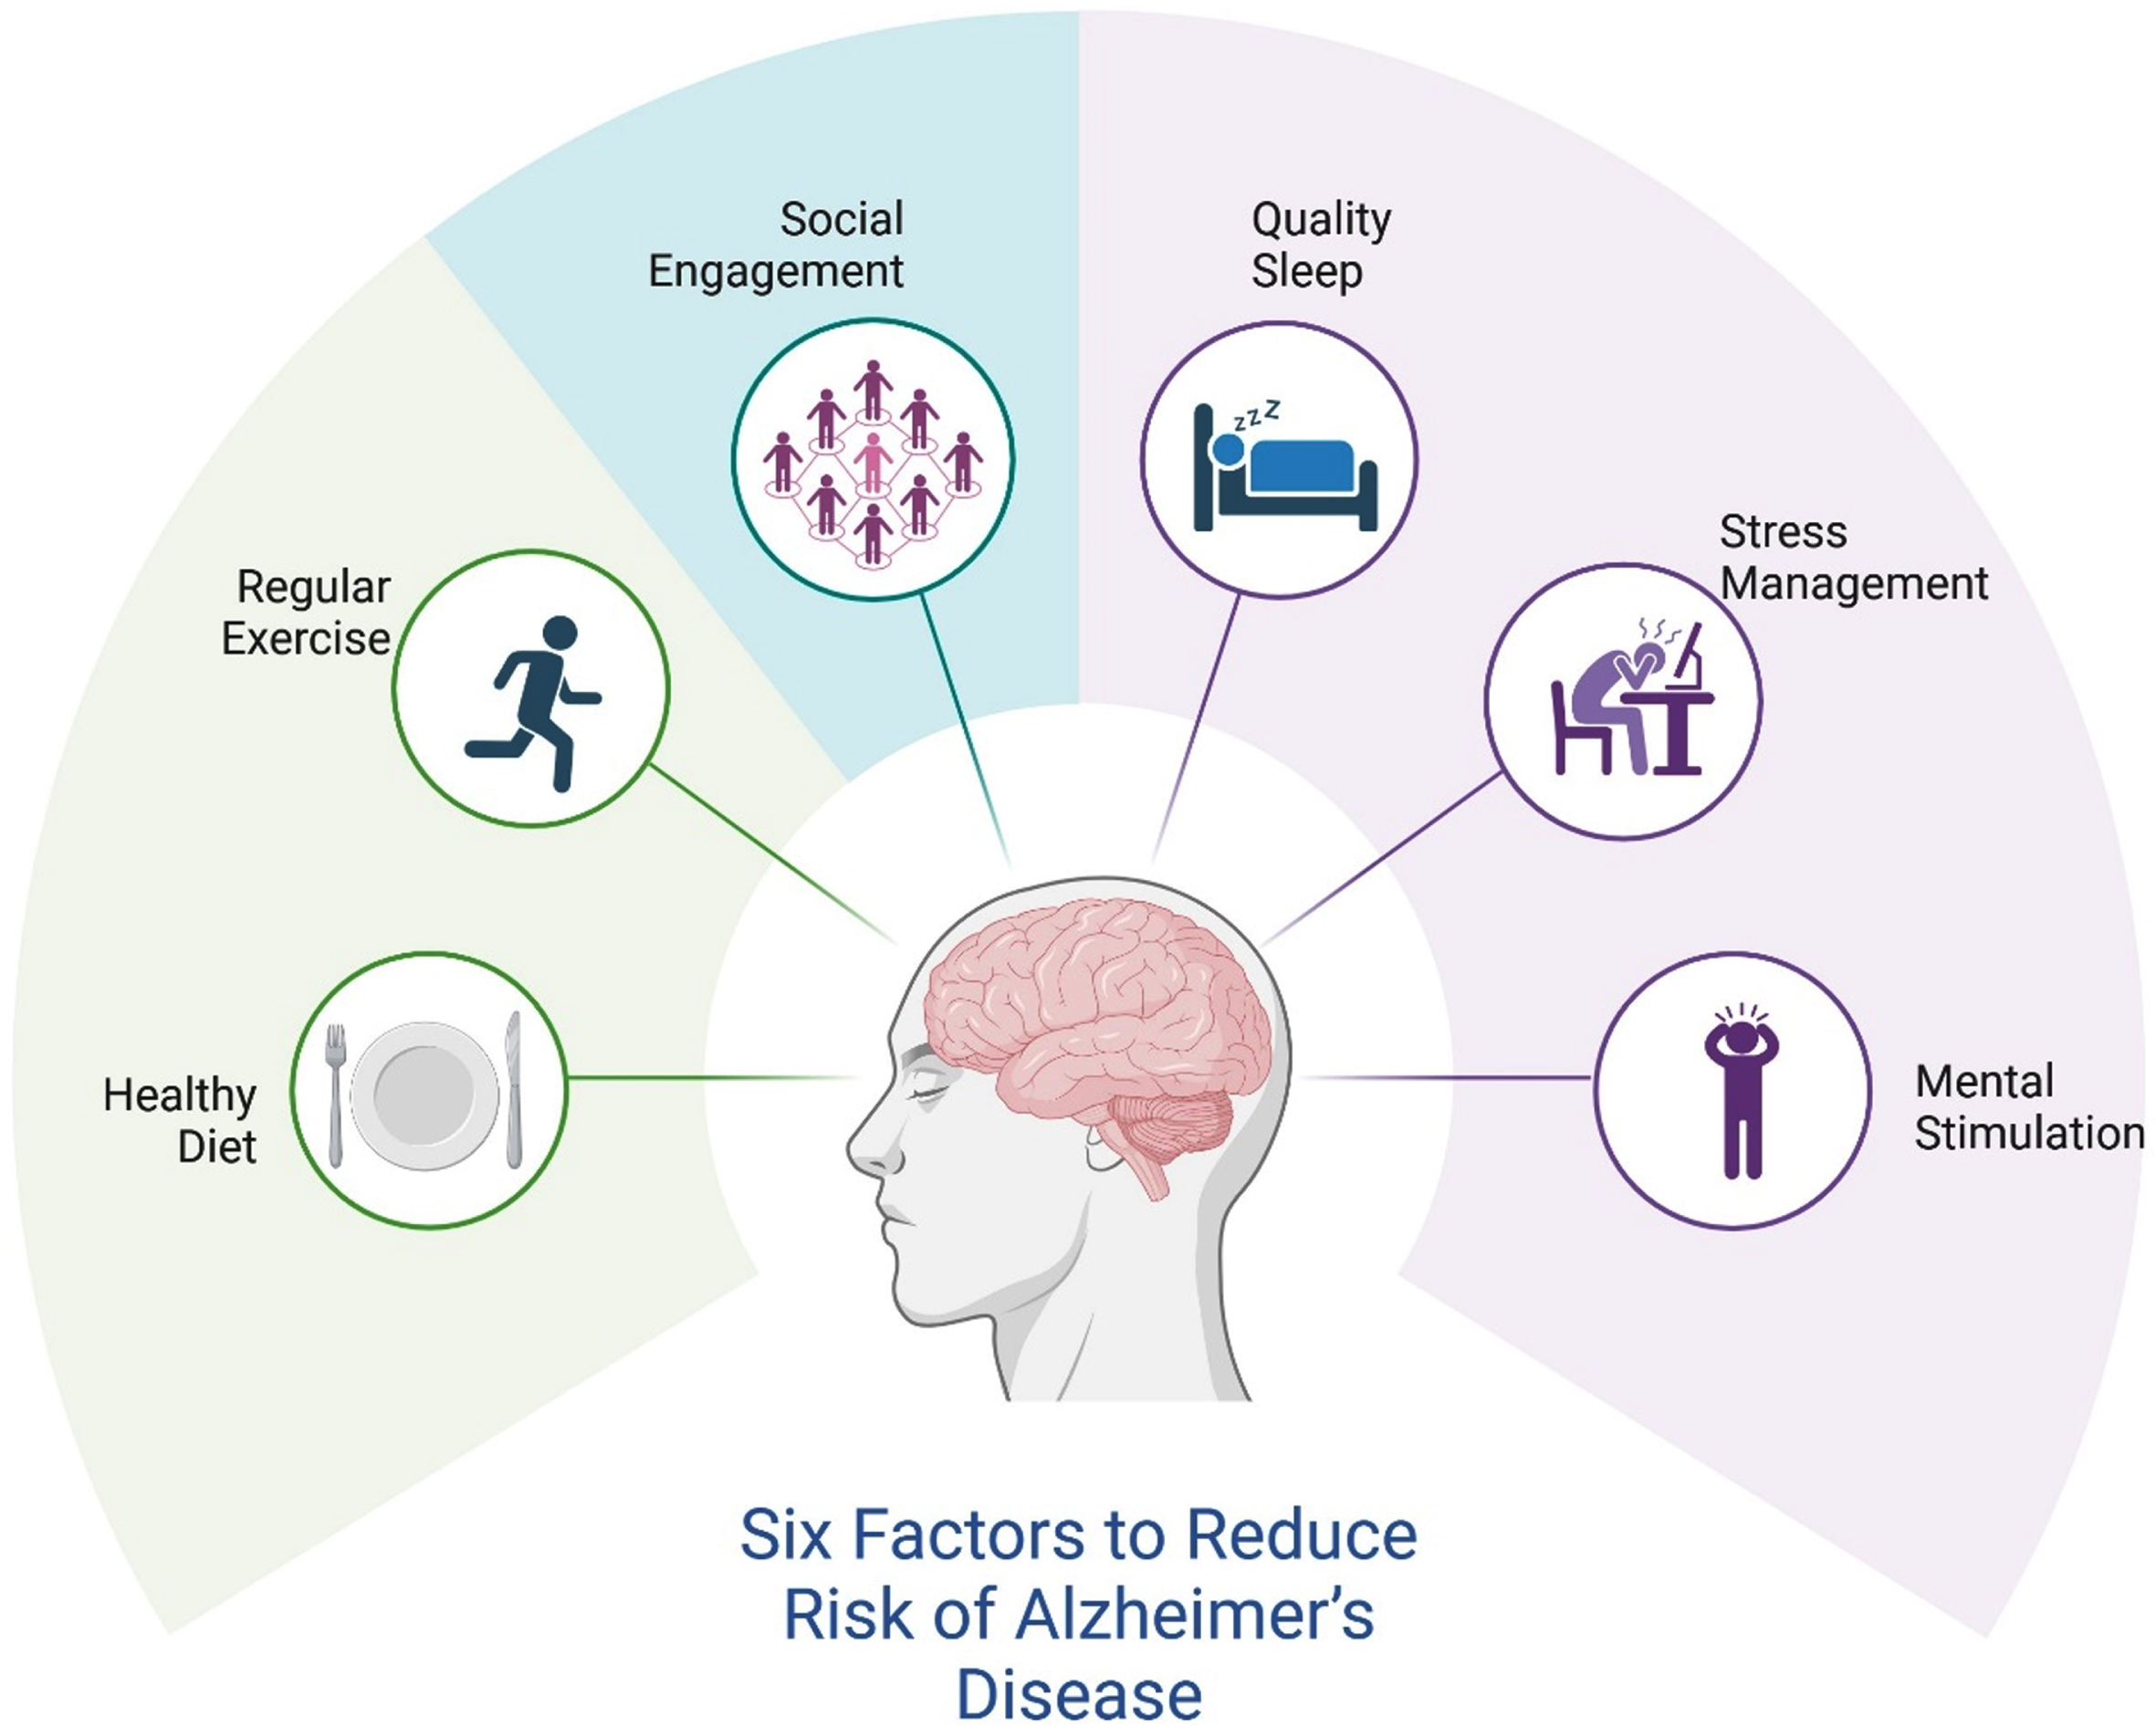 Six key factors to reduce the risk of Alzheimer’s disease. This figure highlights six key lifestyle factors that contribute to reducing the risk of Alzheimer’s disease. Illustrated around a central brain image, the factors include healthy diet, regular exercise, social ì engagement, quality sleep, stress management and mental stimulation. Collectively, these factors emphasize the importance of physical, mental, and social well-being in maintaining cognitive health. Created with BioRender.com.